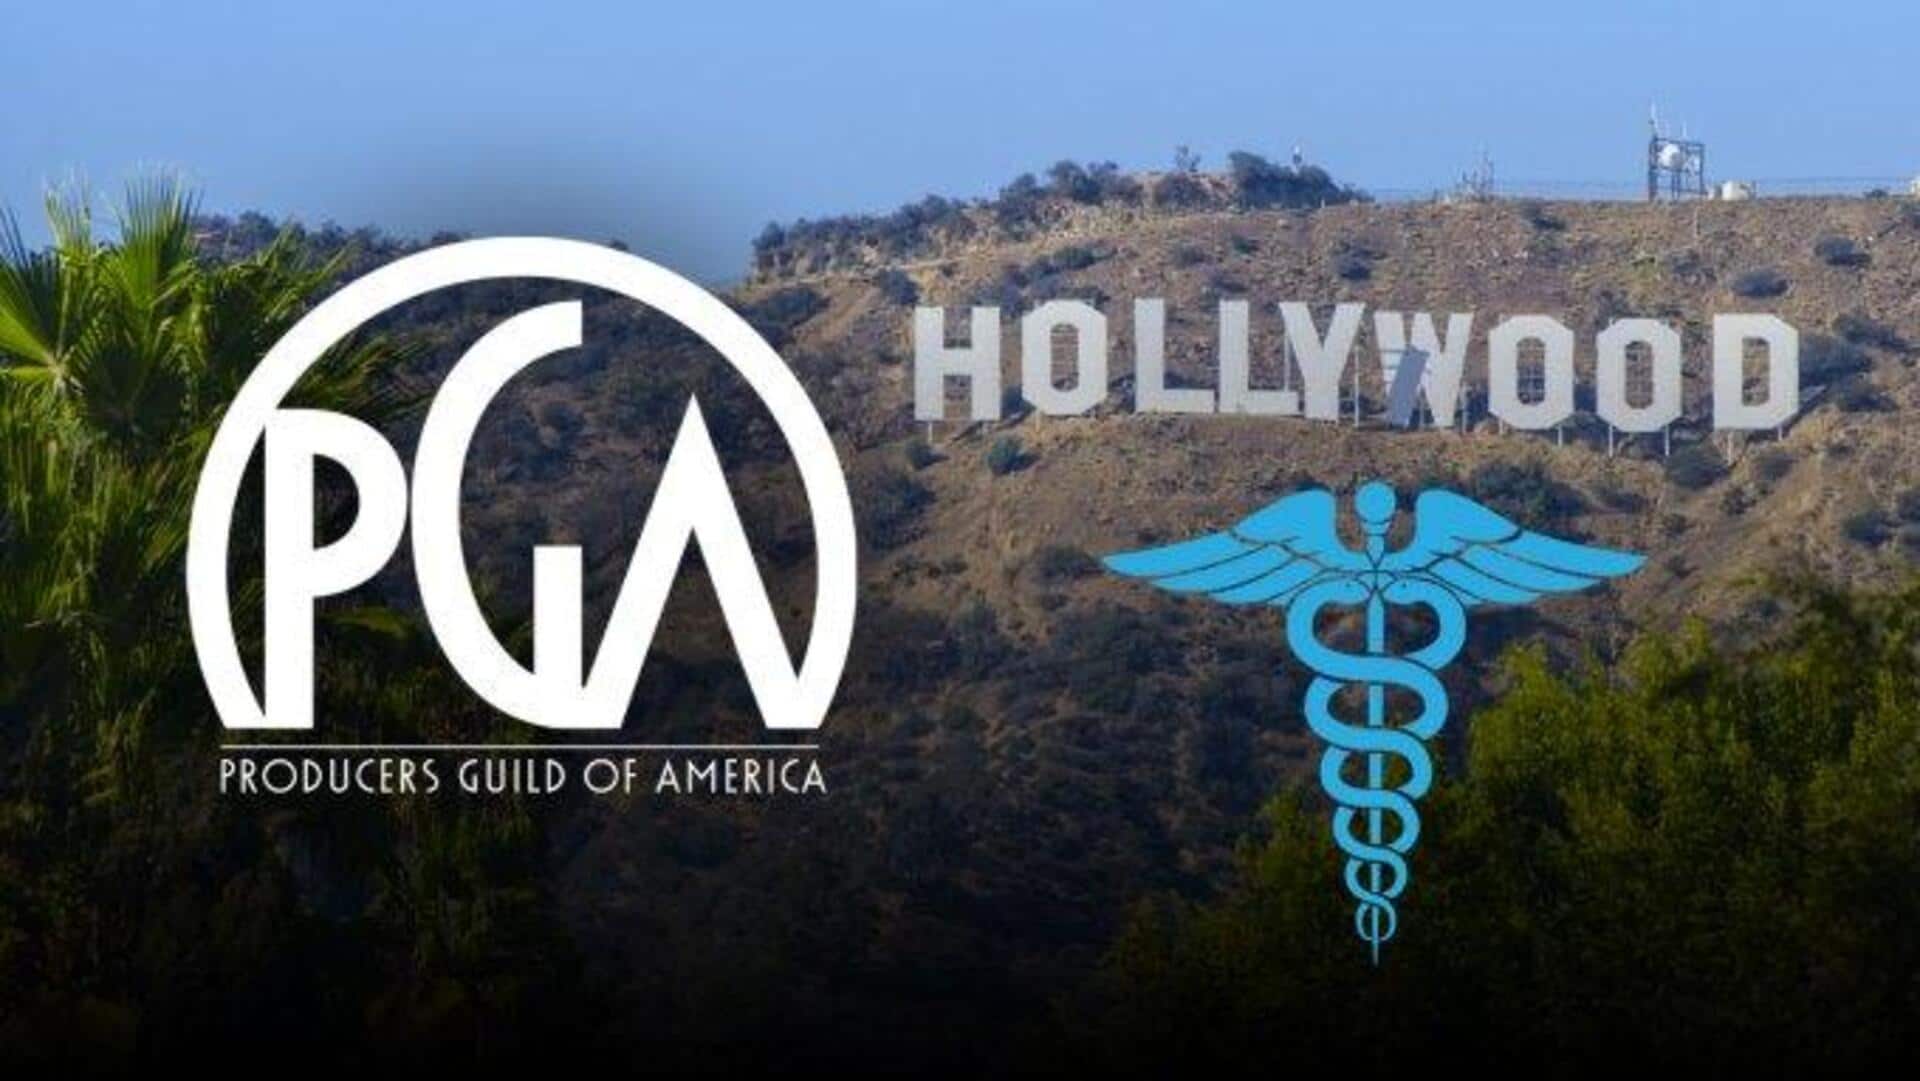 Producers Guild launches health insurance plan for Hollywood producers